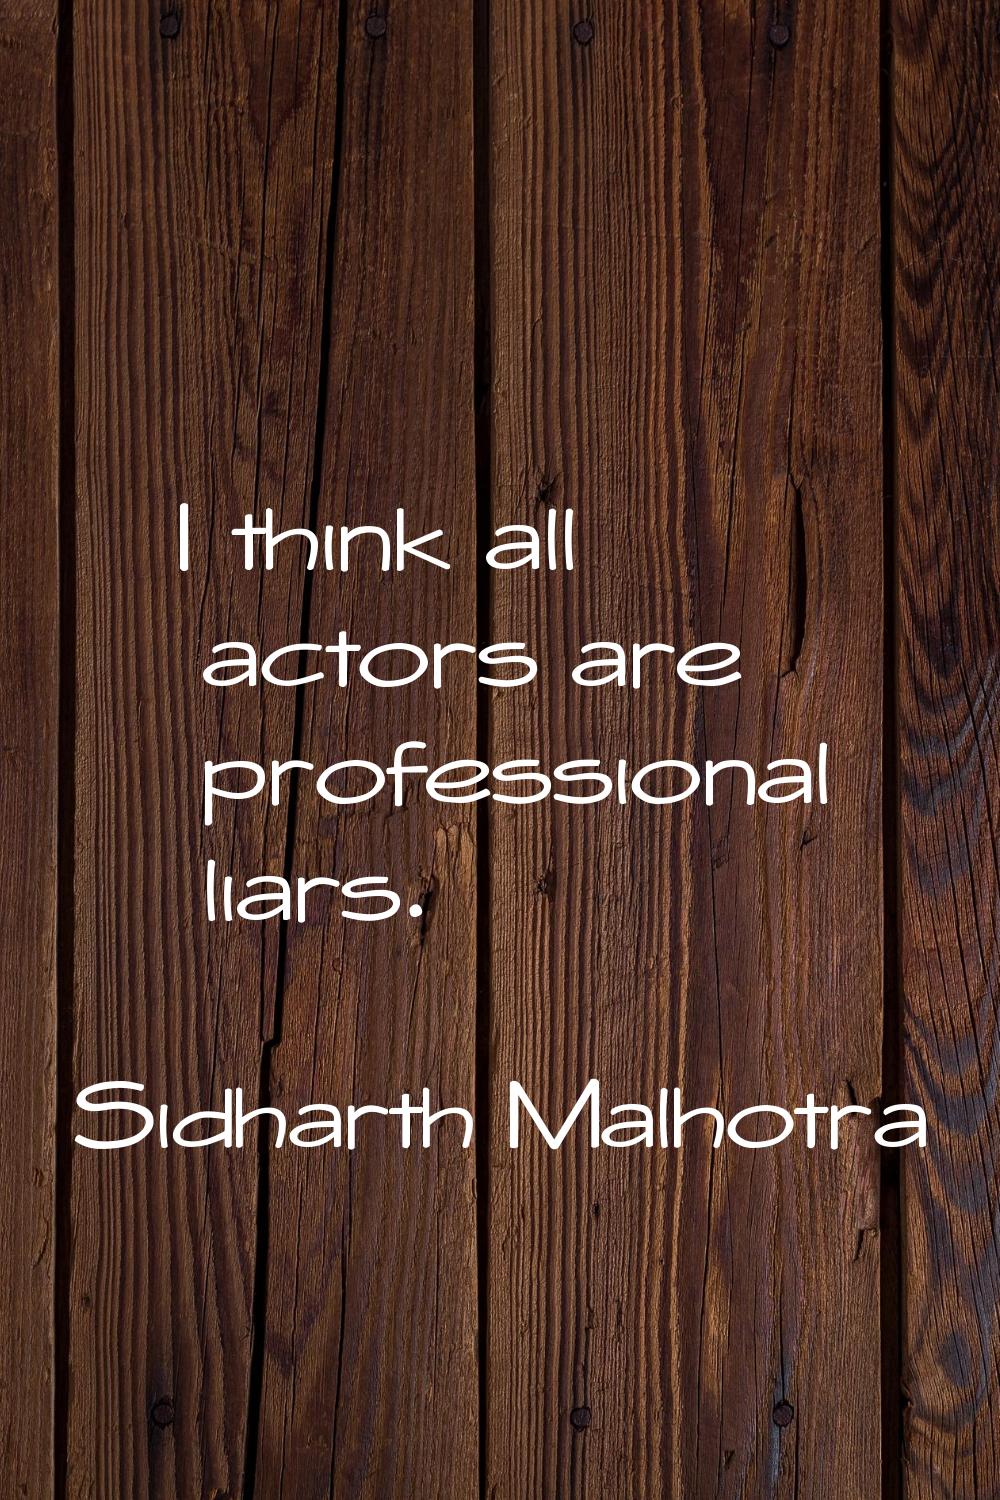 I think all actors are professional liars.